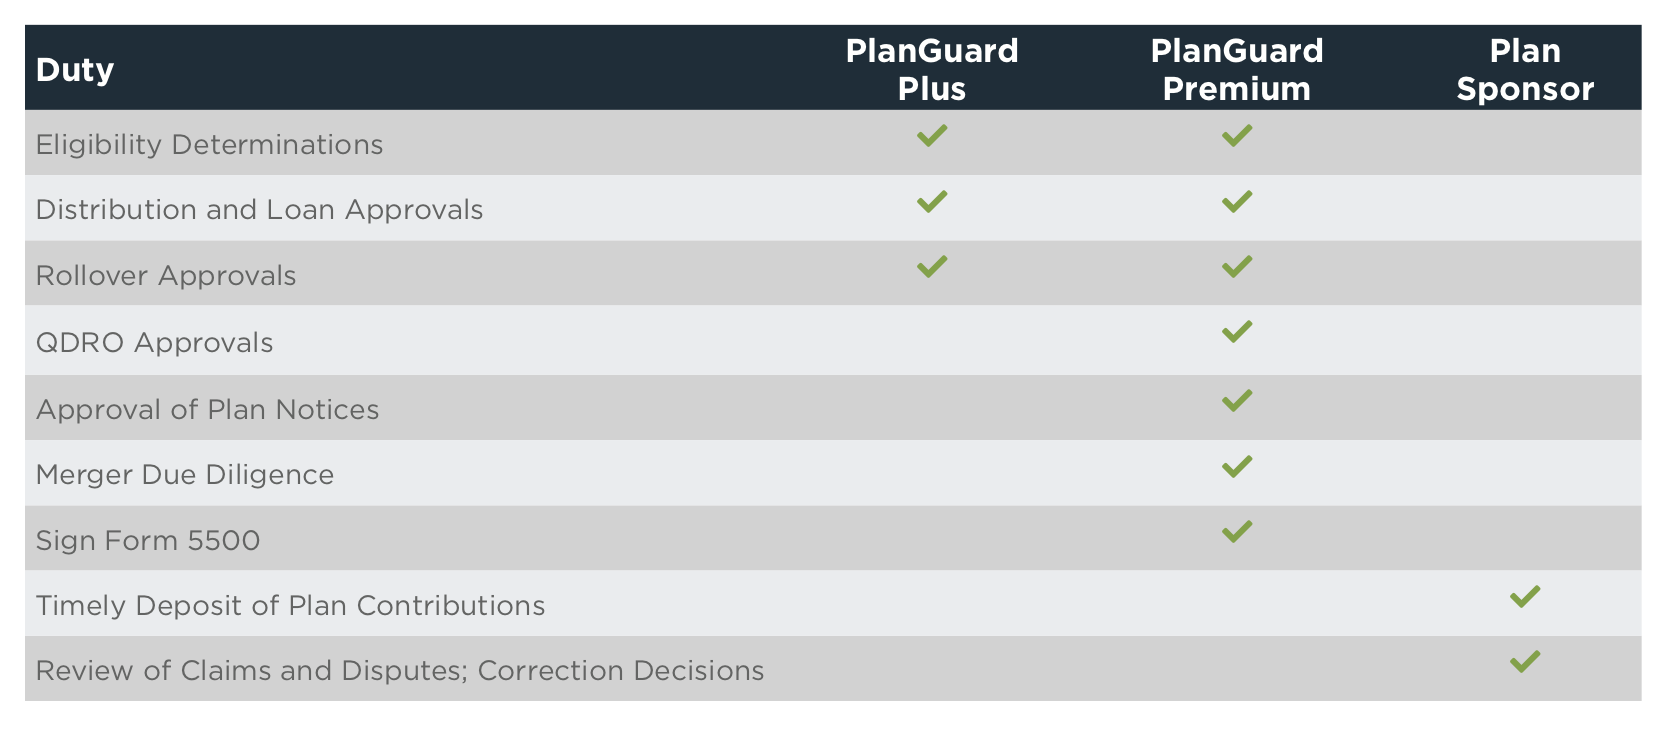 PlanGuard fiduciary service offerings table